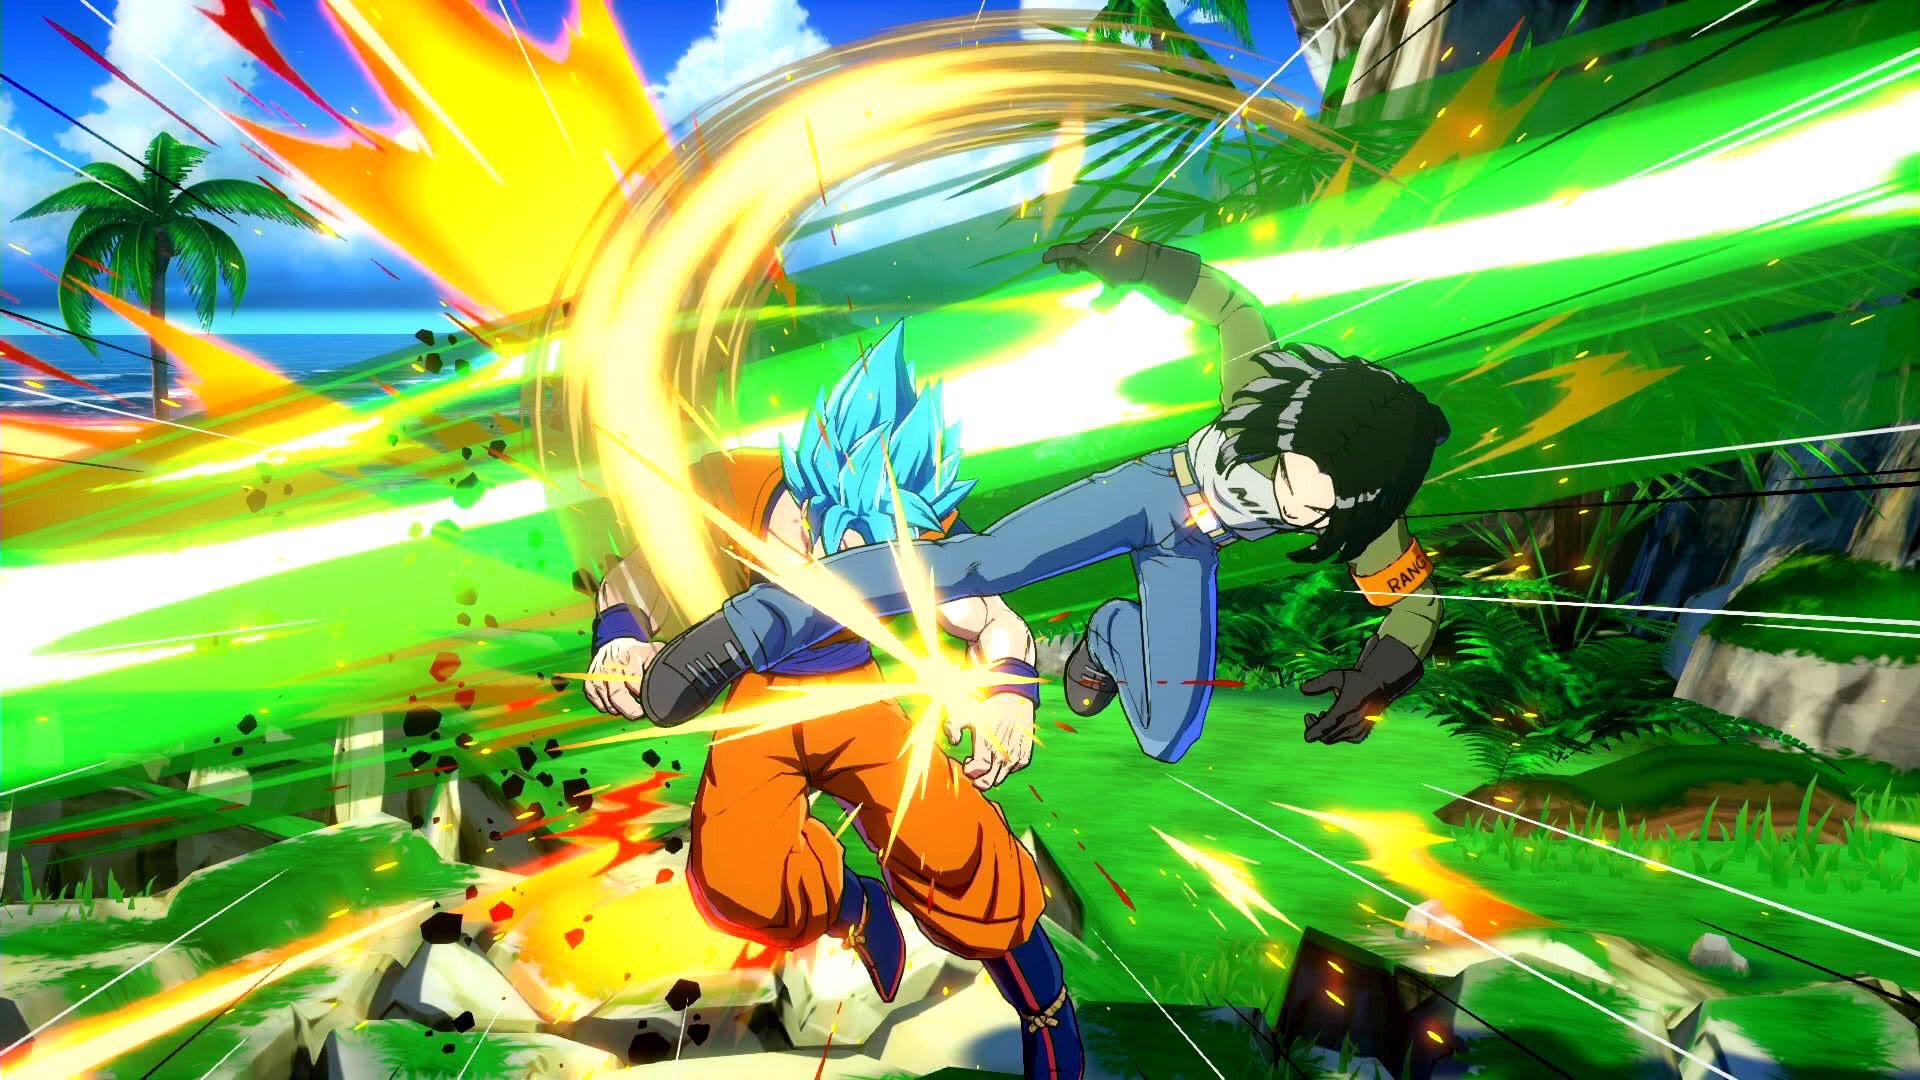 Android 17 joins the fight in DRAGON BALL FighterZ